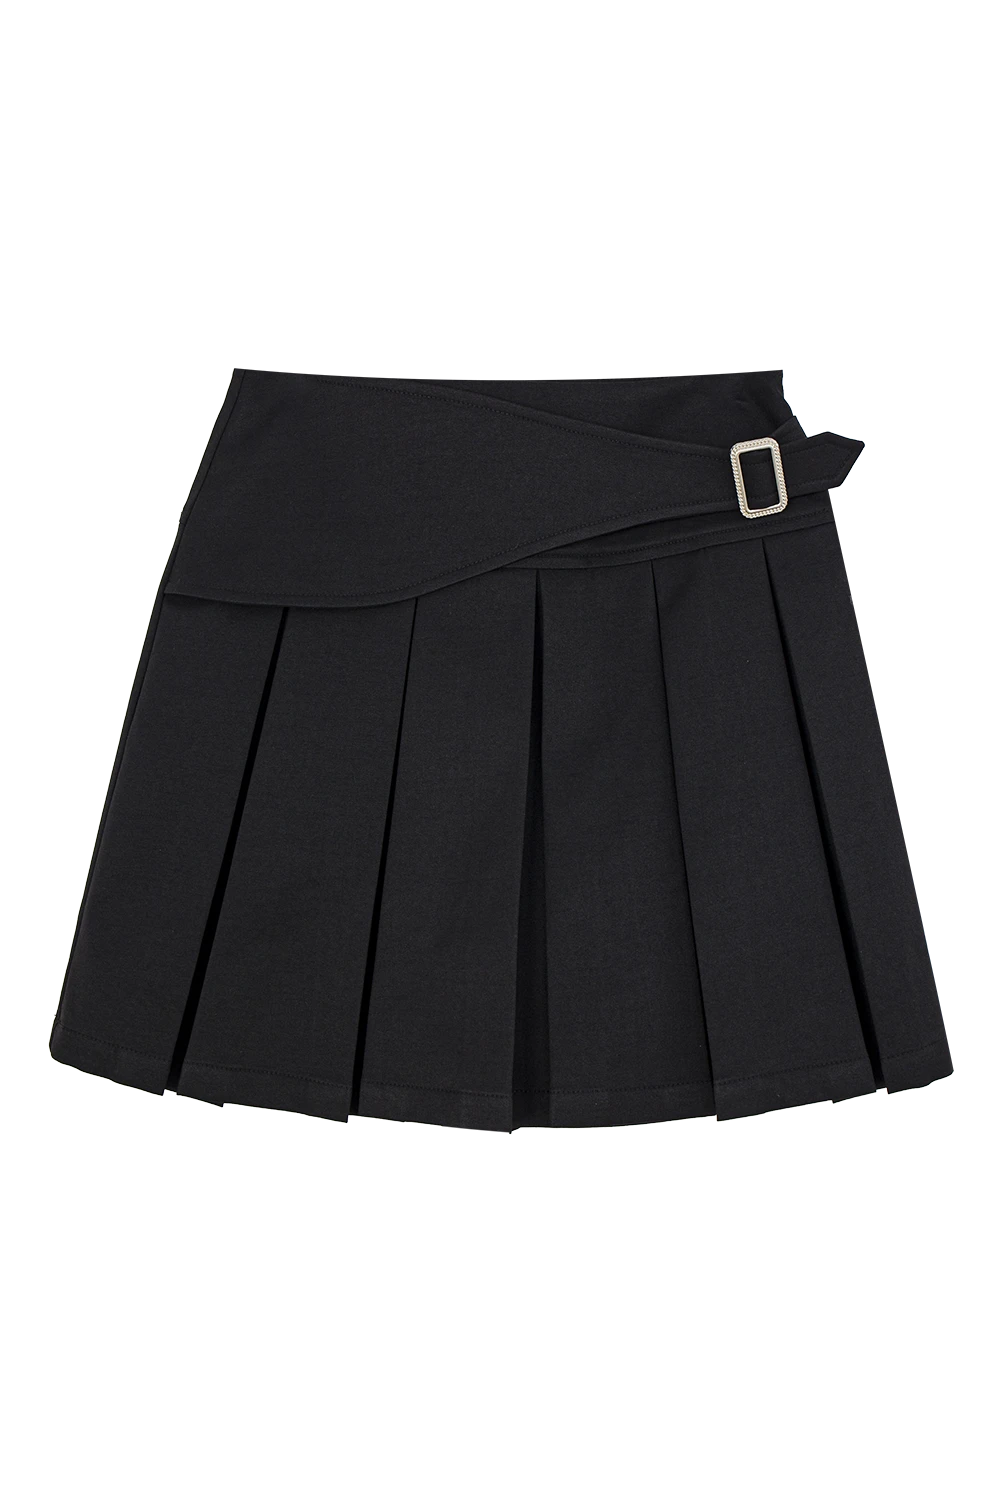 Chic High-Waisted Pleated Skirt with Trendy Side Buckle